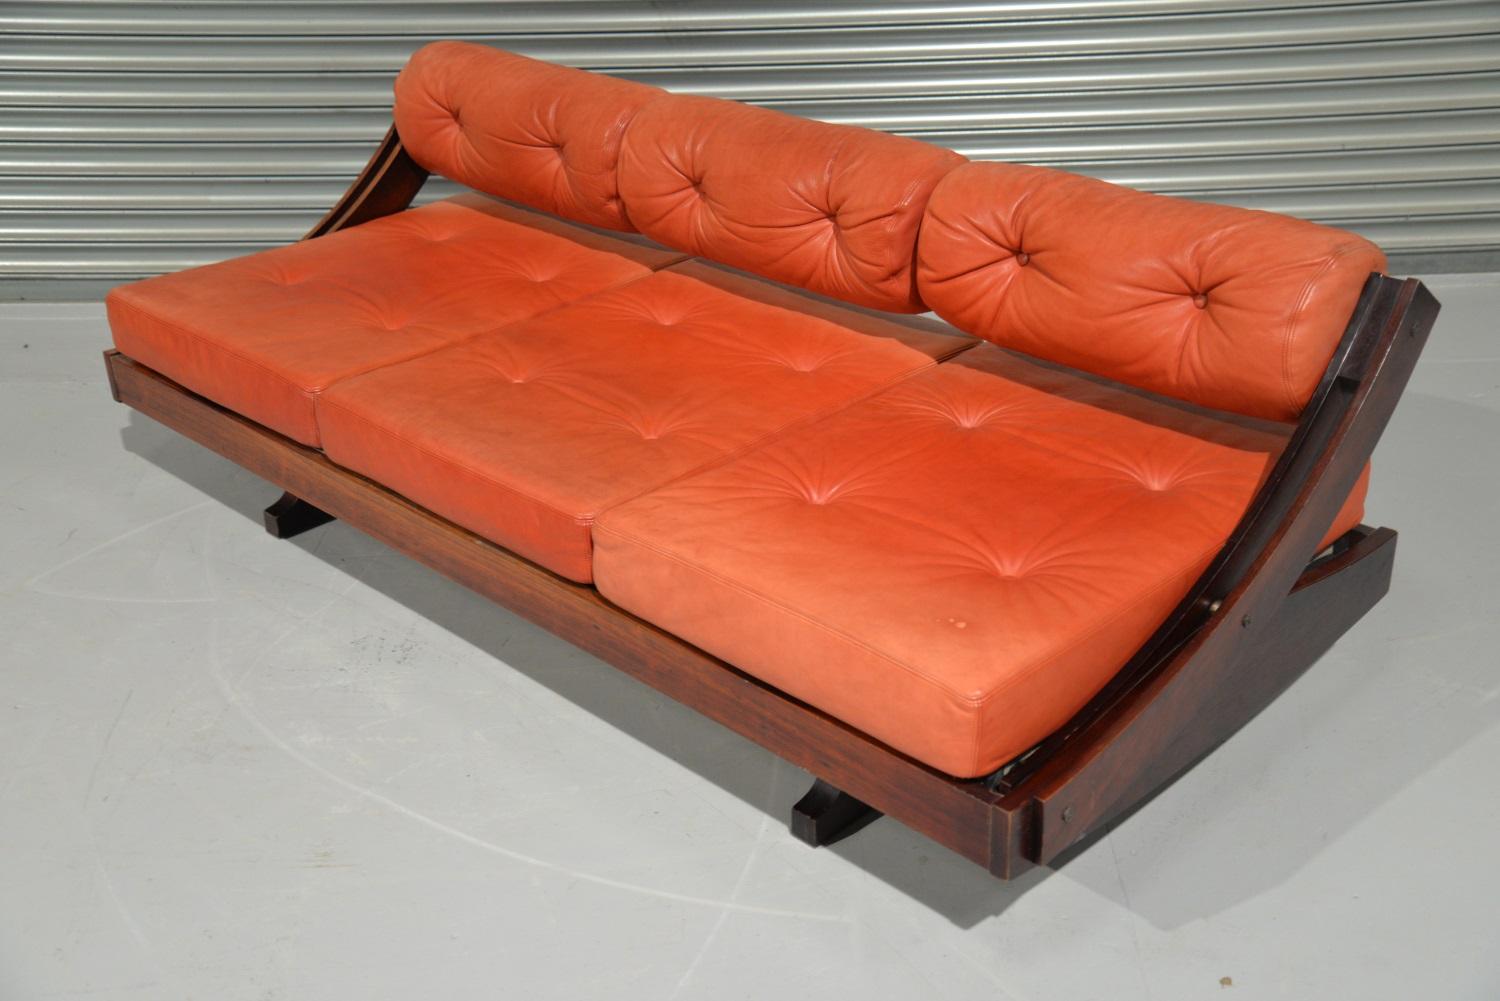 Gianni Songia Daybed/Sofa Designed for Sormani of Italy, 1963 In Good Condition For Sale In Fen Drayton, Cambridgeshire